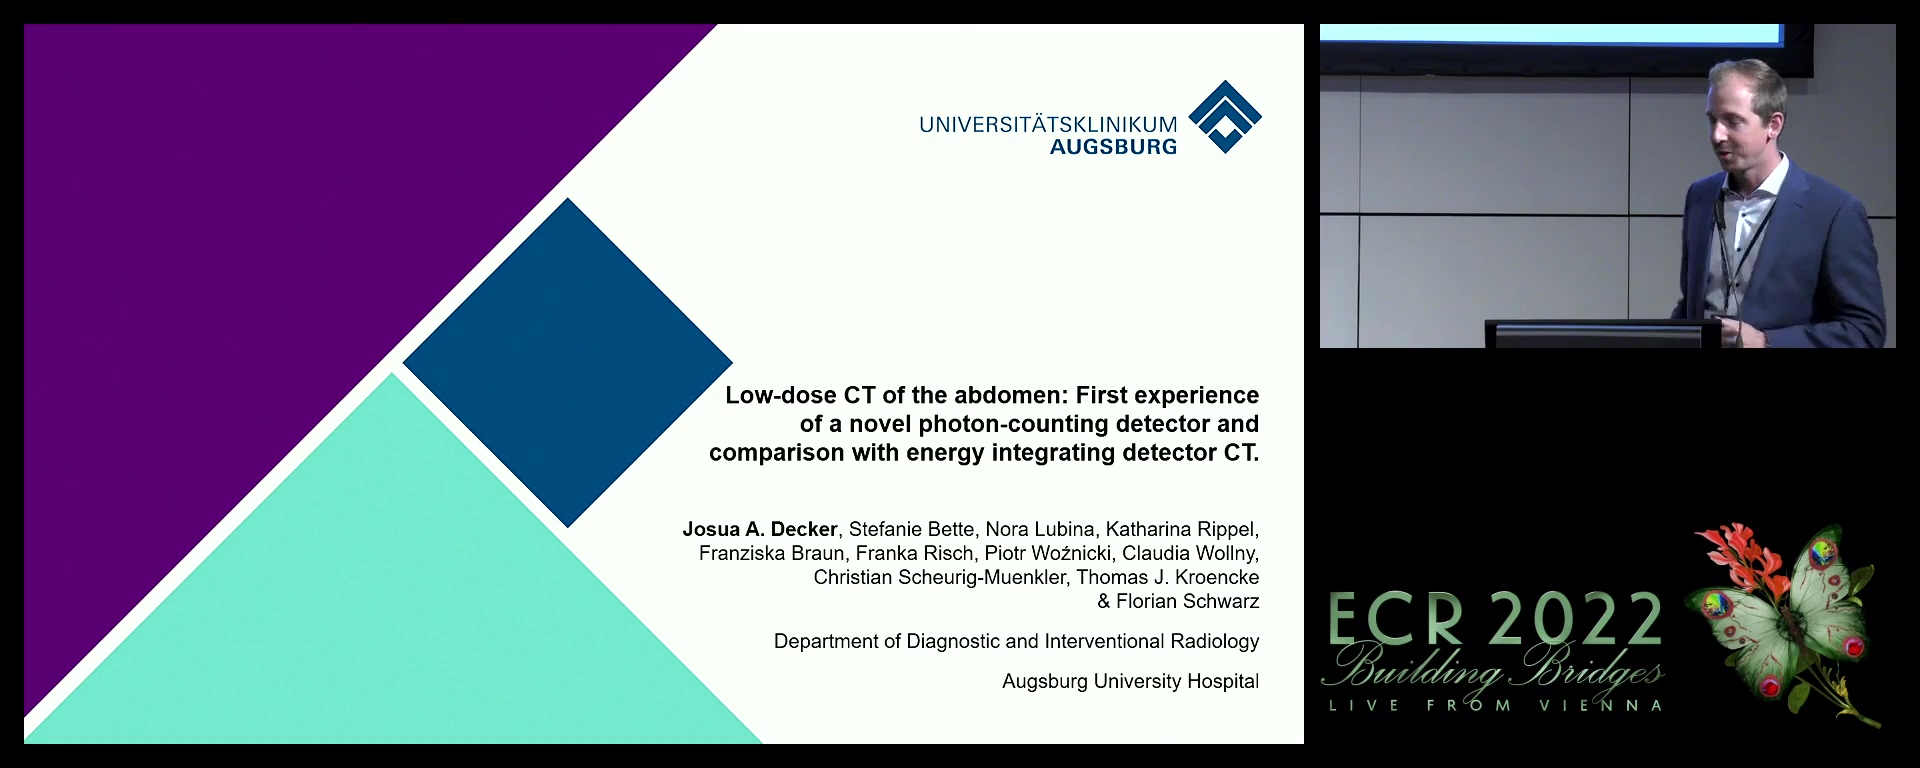 Low-dose CT of the abdomen: initial experience on a novel photon-counting detector CT and comparison with energy-integrating detector CT - Josua Decker, Augsburg / DE